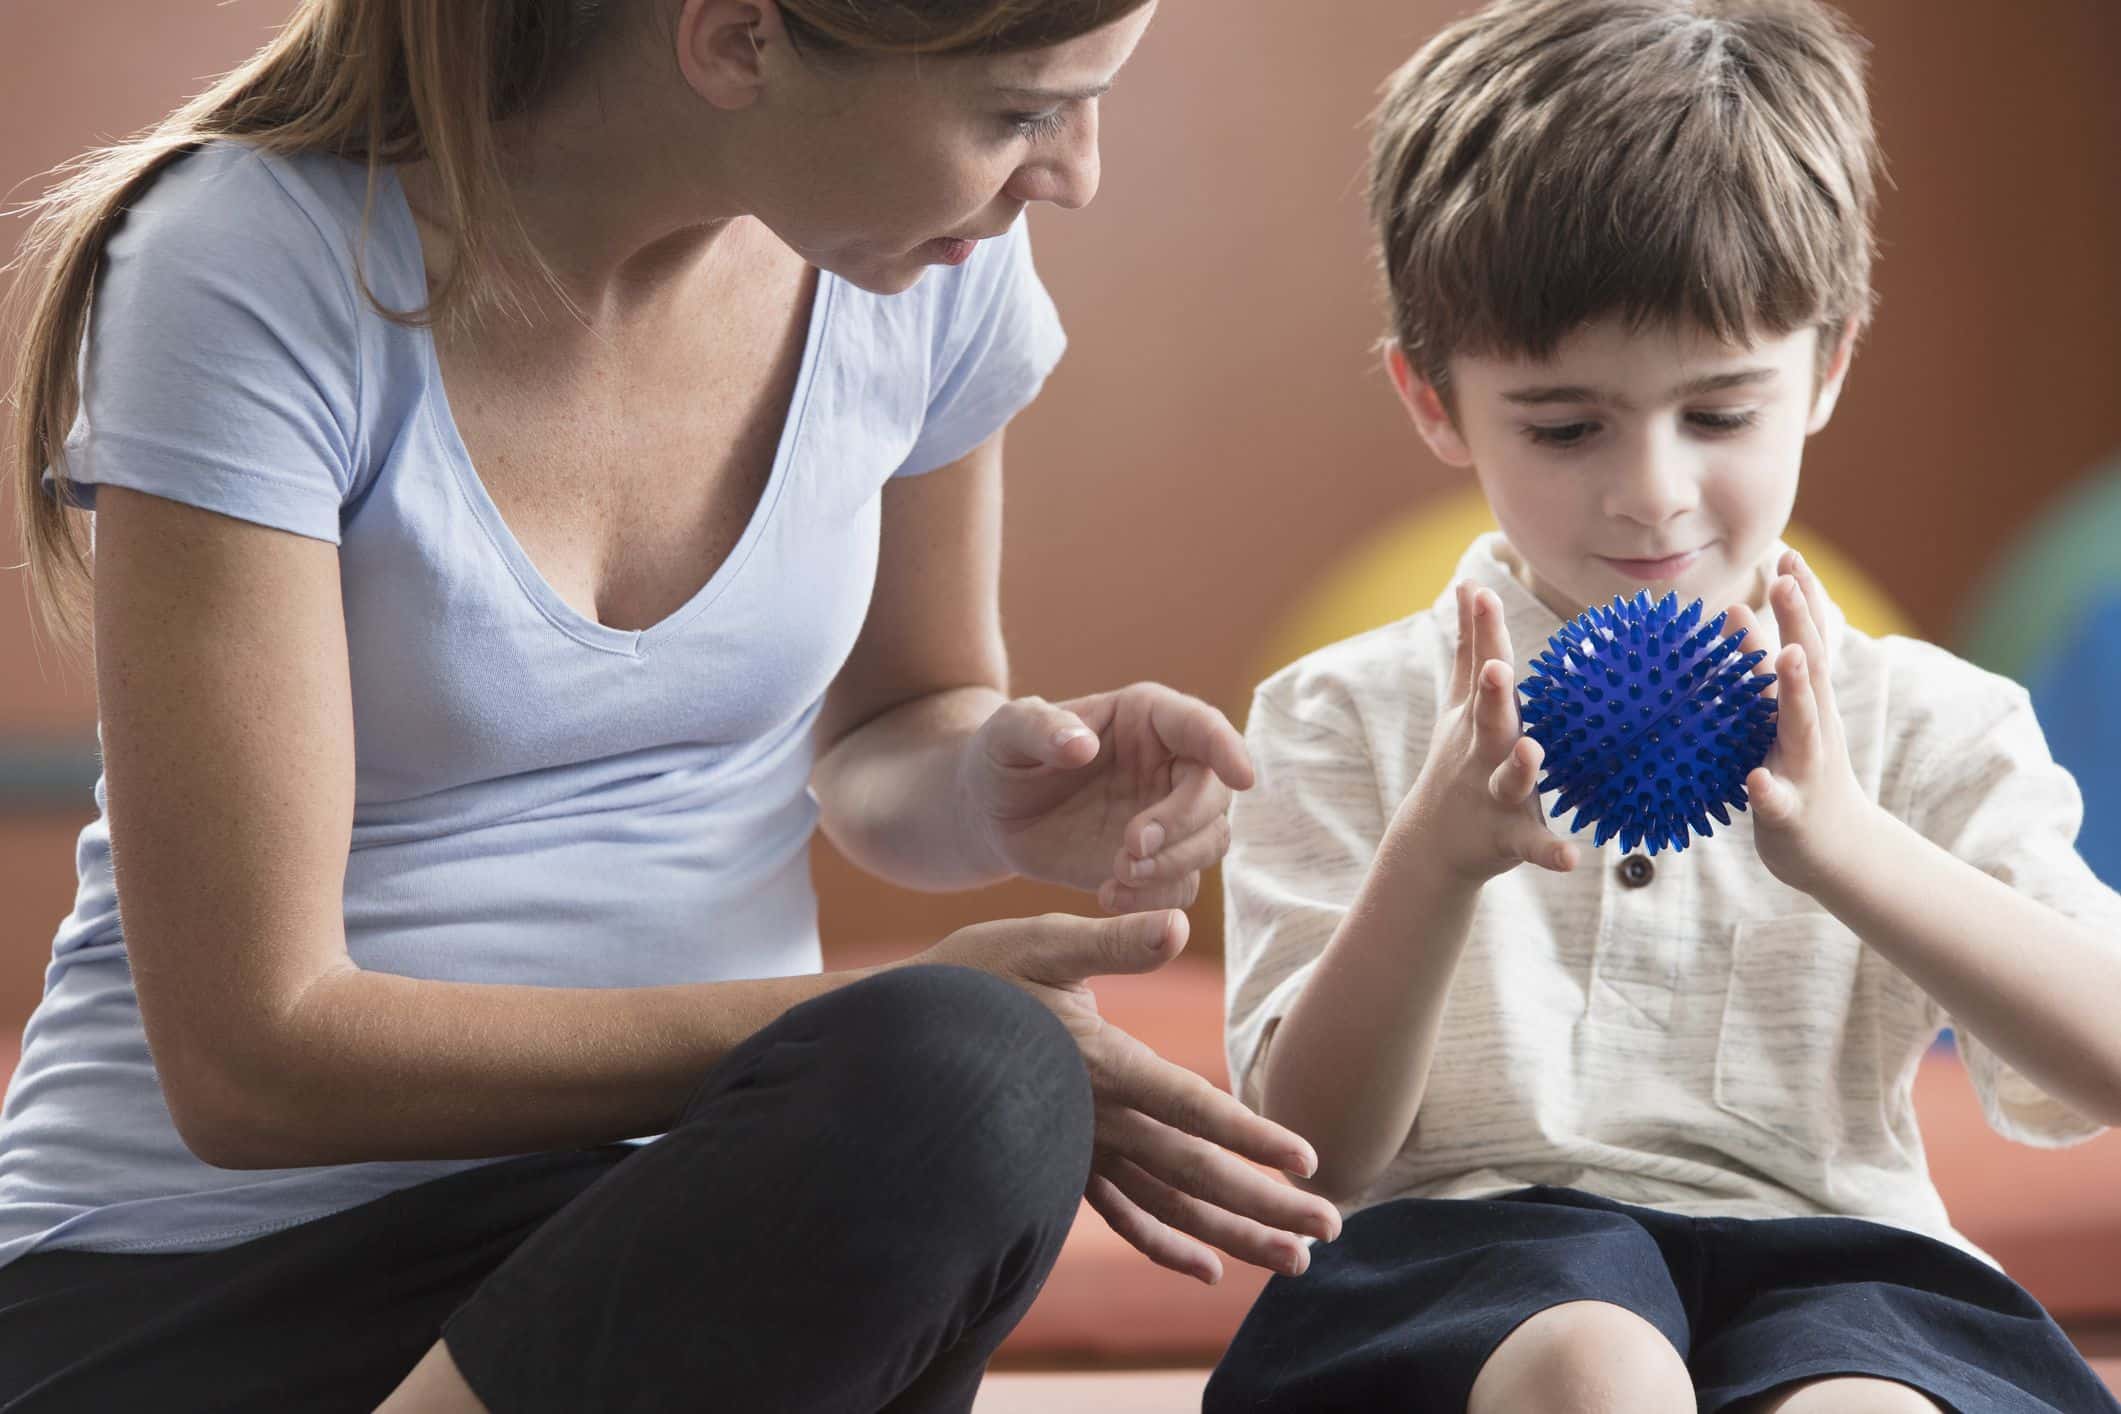 Using Physical Therapy as a Treatment for Autism